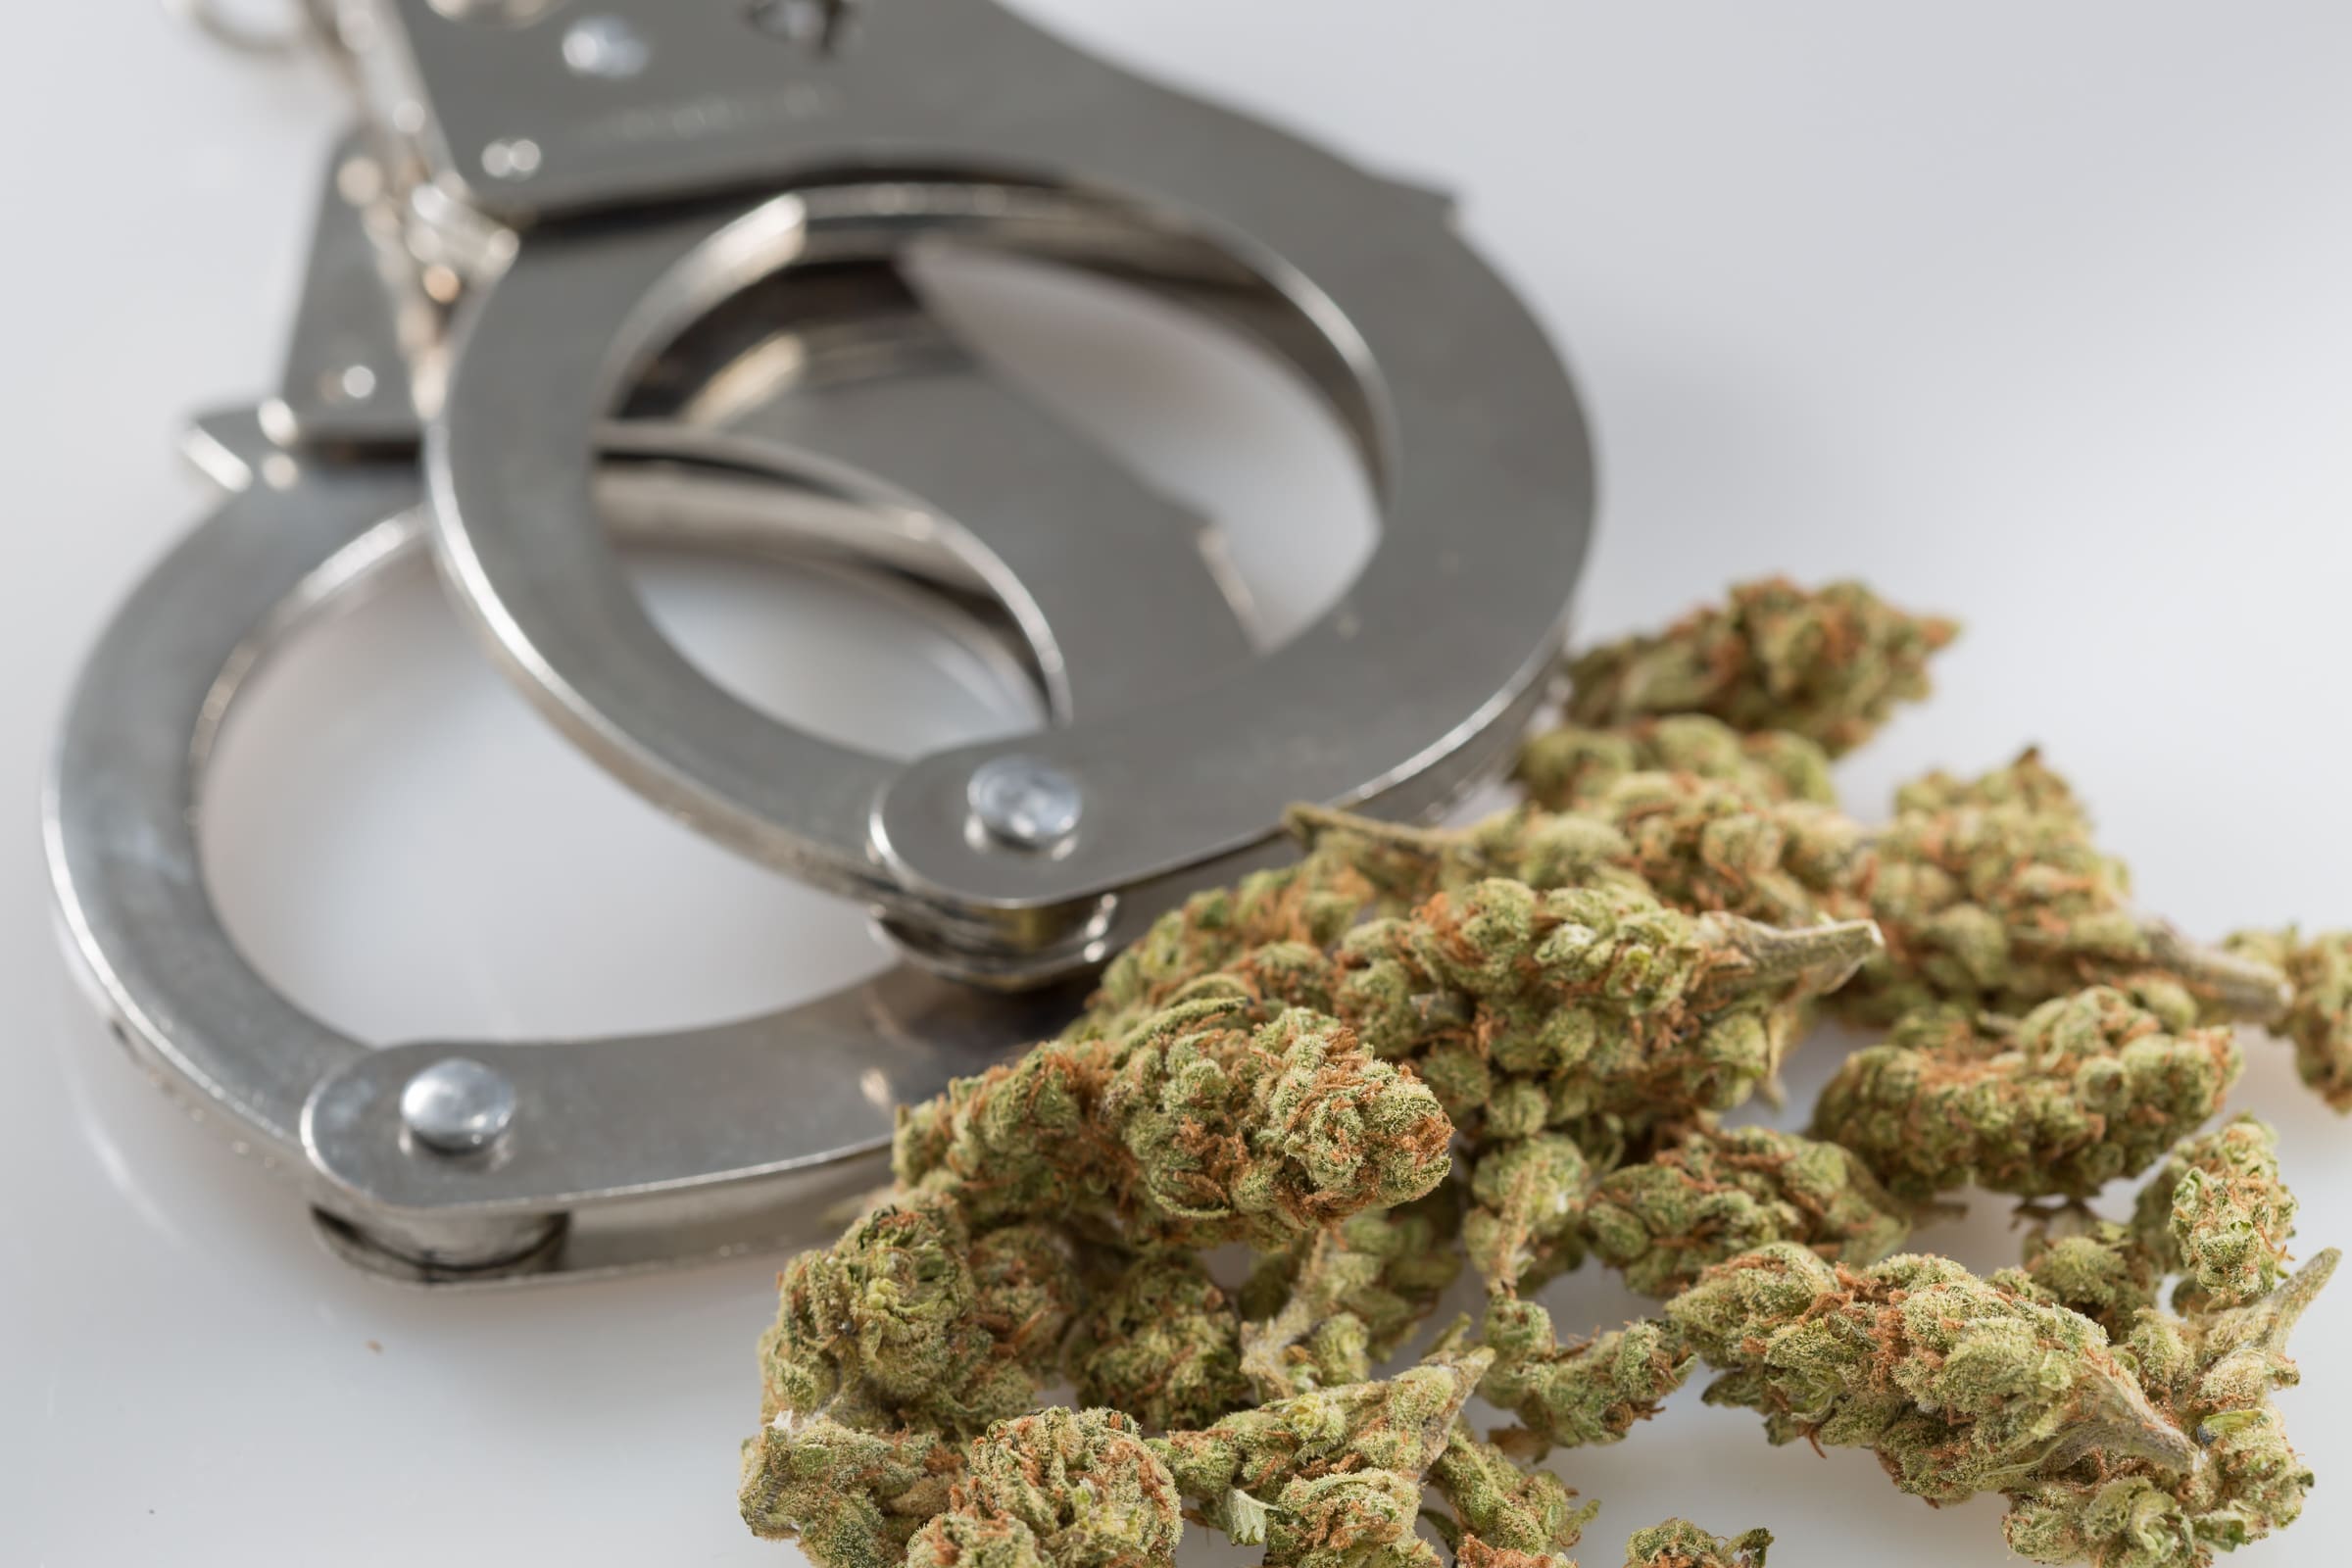 MORE Act may not help cannabis convictions